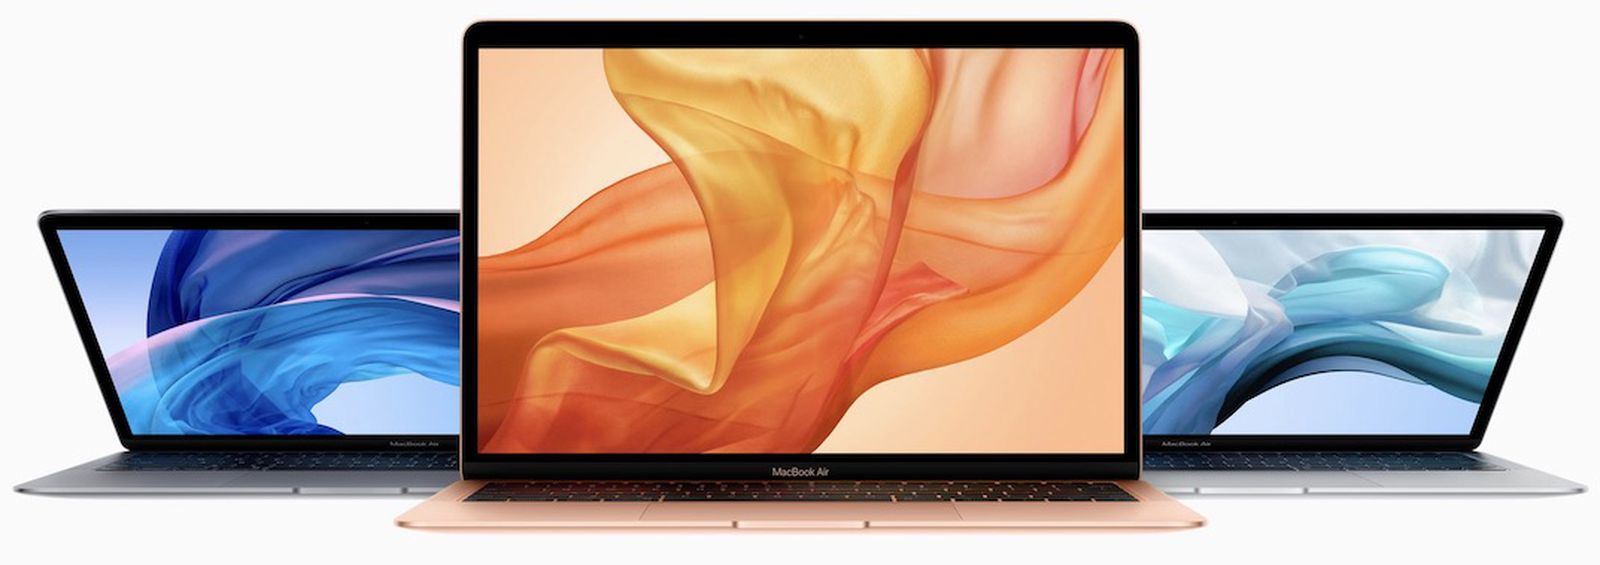 2020 MacBook Air With Quad-Core i5 is Up to 76% Faster Than 2018 